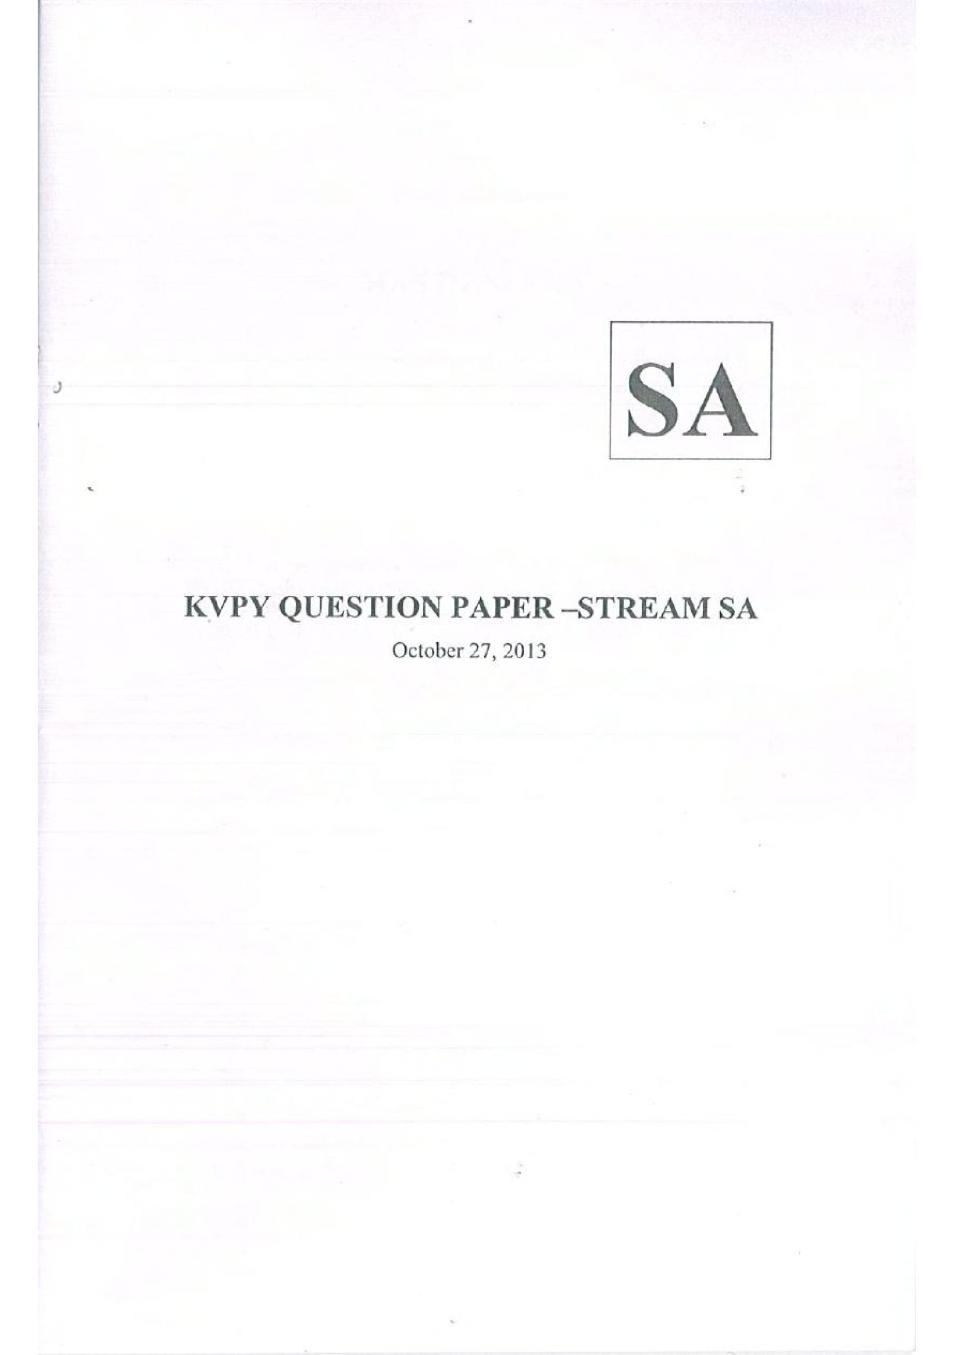 KVPY 2013 Question Paper with Answer Key for SA Stream - Page 1